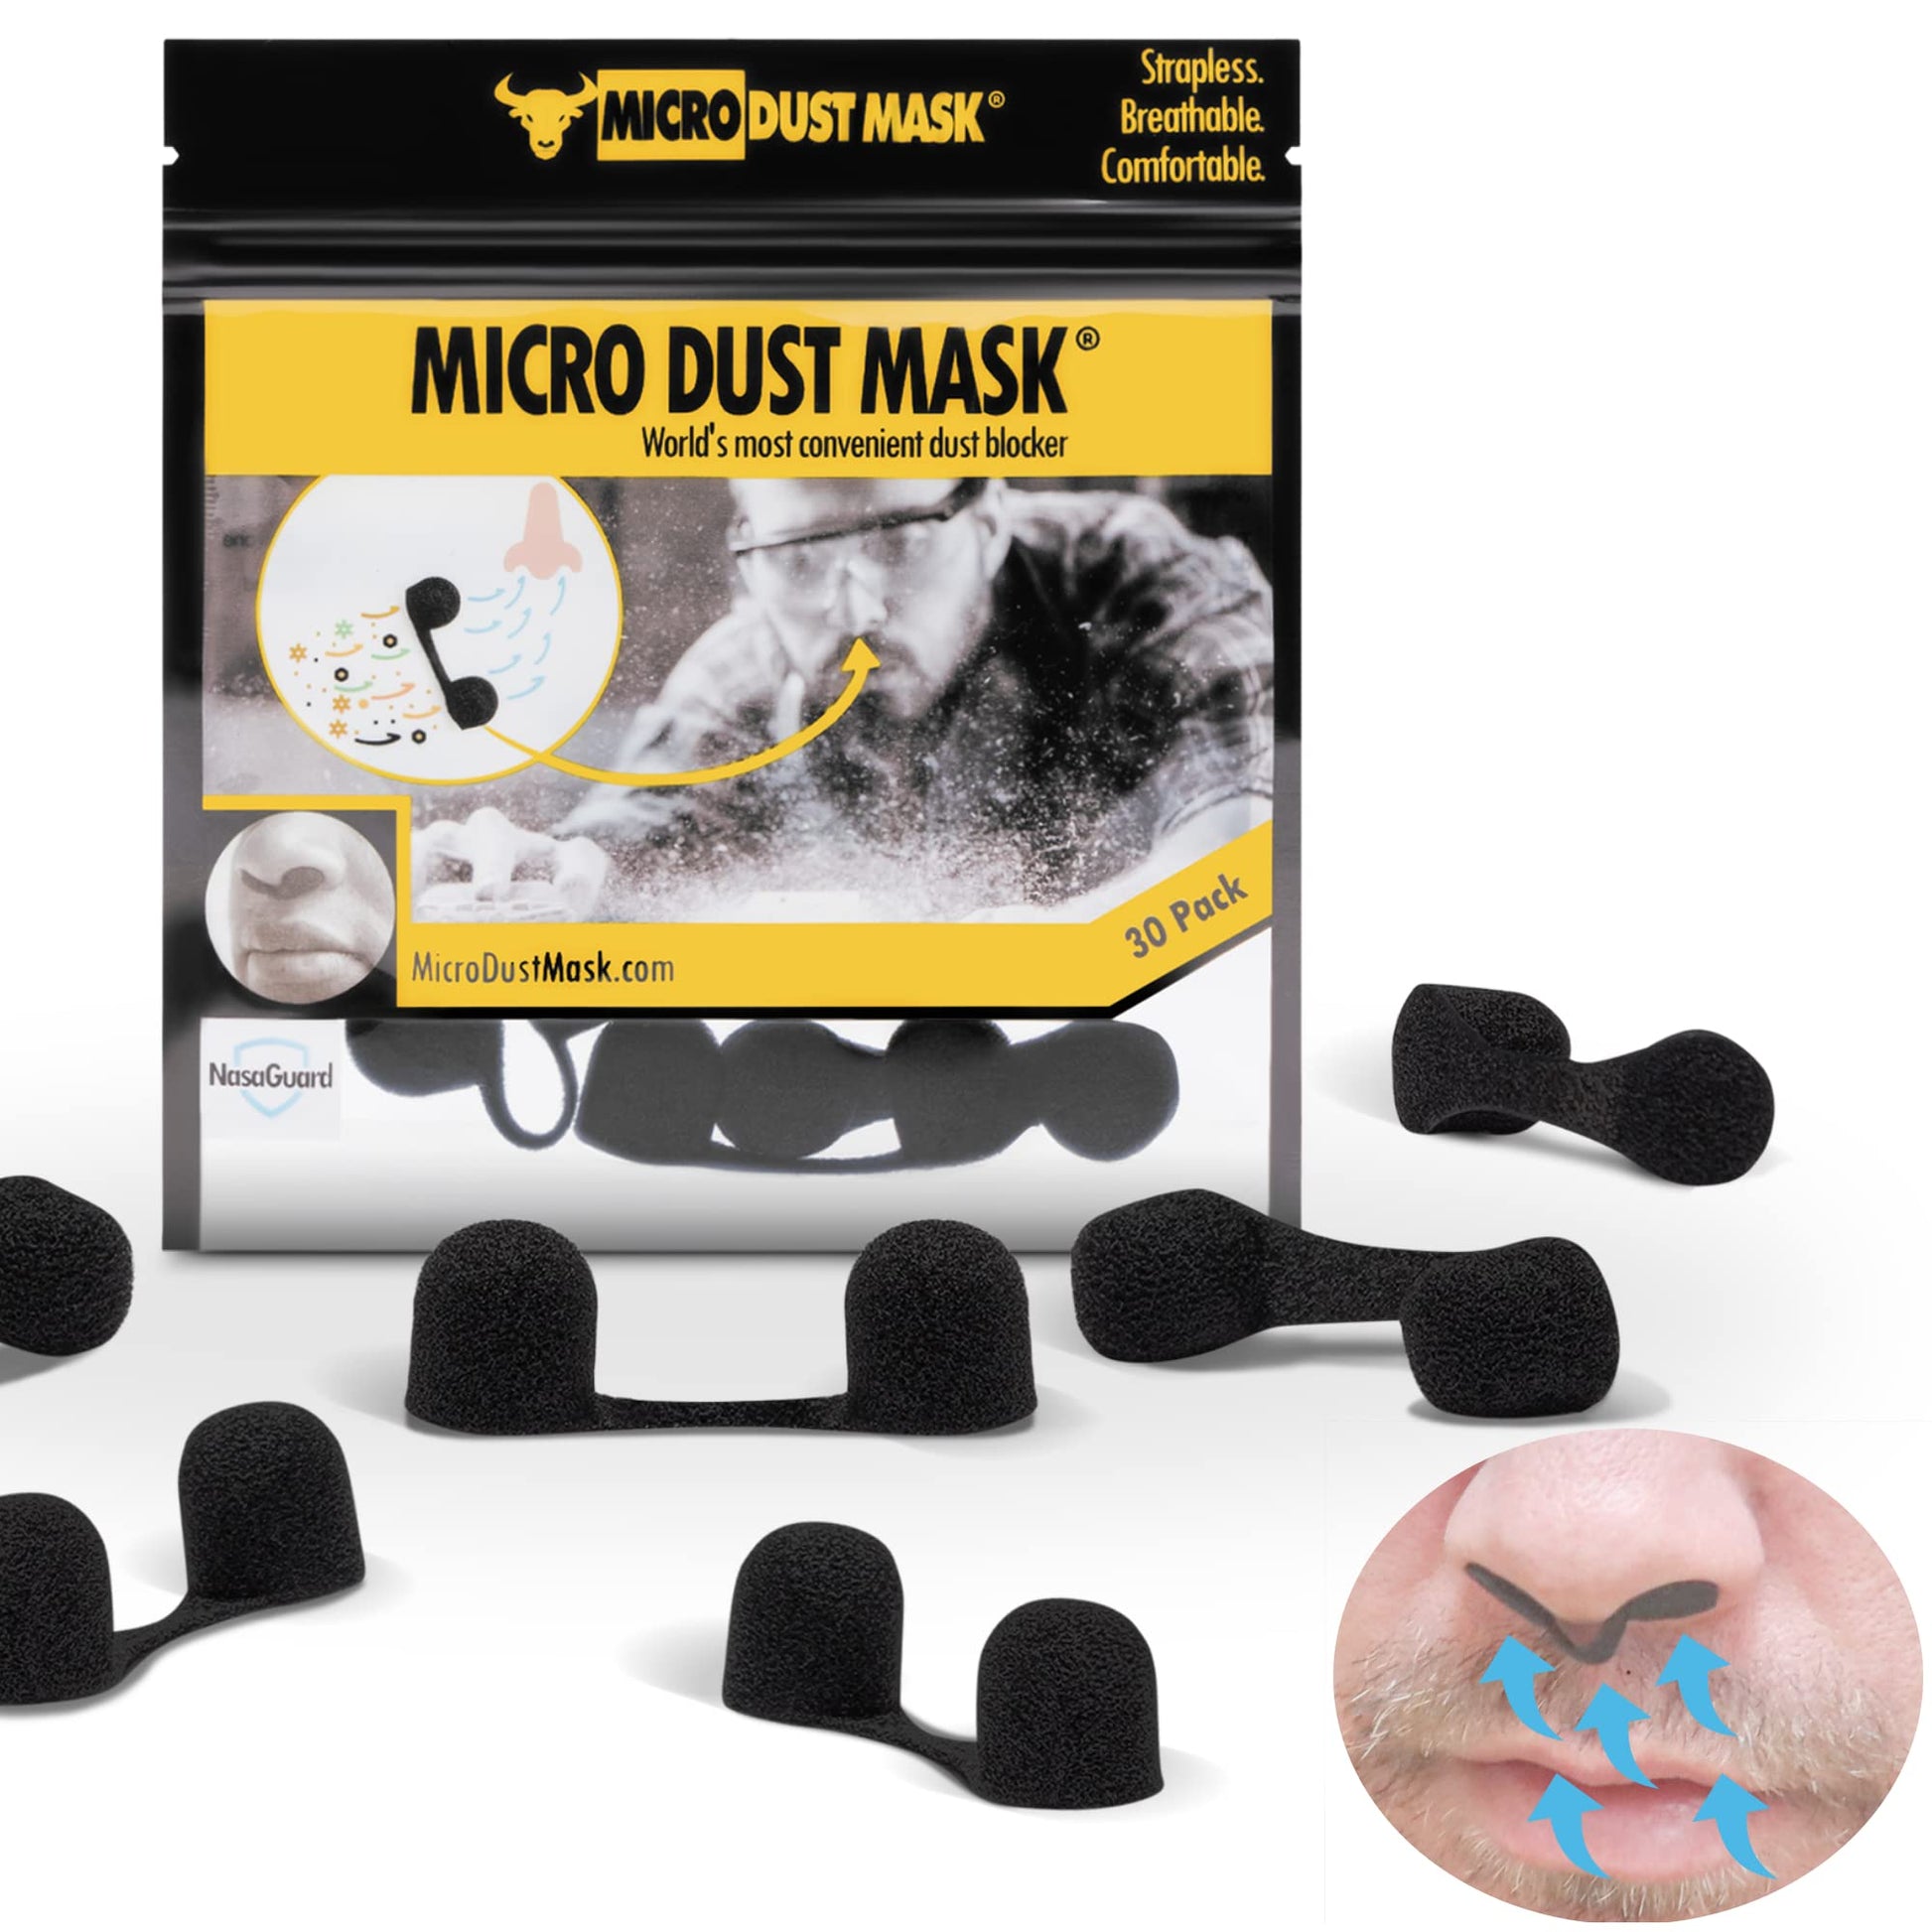 Micro Dust Mask - Dust Blocker Nose Filter - Dust Mask for Nose - Disposable Personal Protective Nose Mask Nasal Filter - Breath